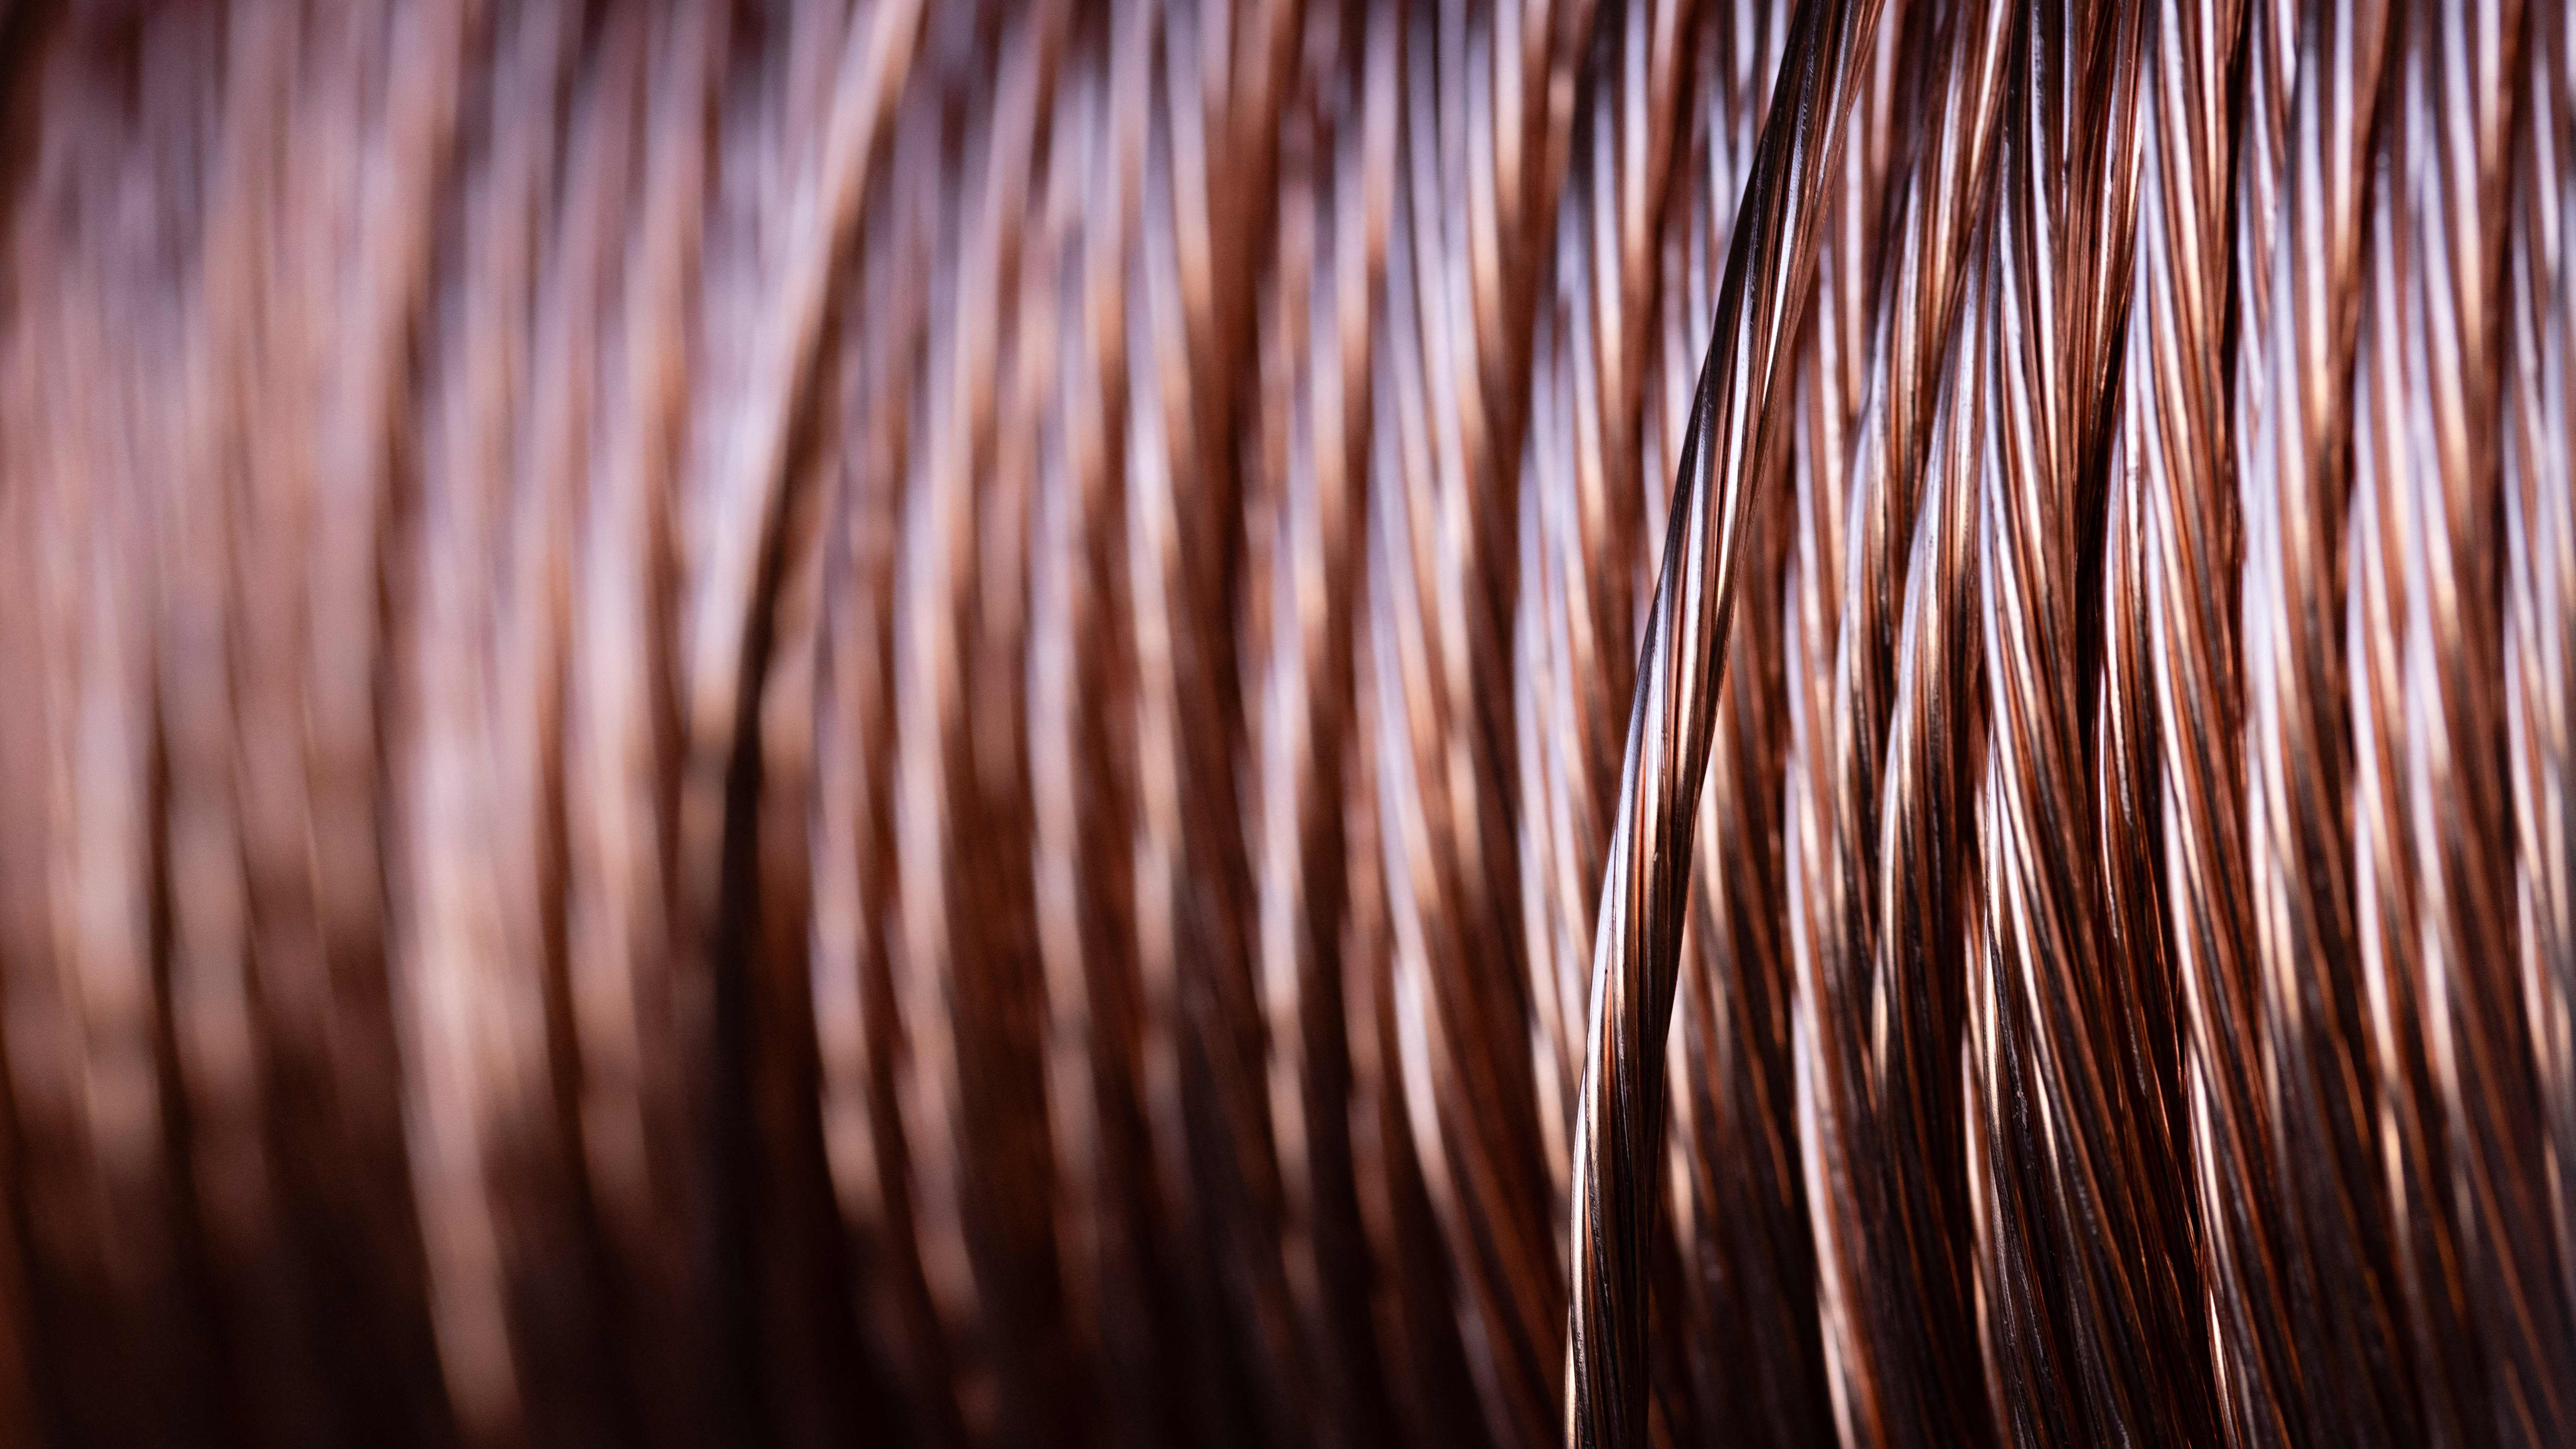 Copper prices continue to rise, approaching June highs